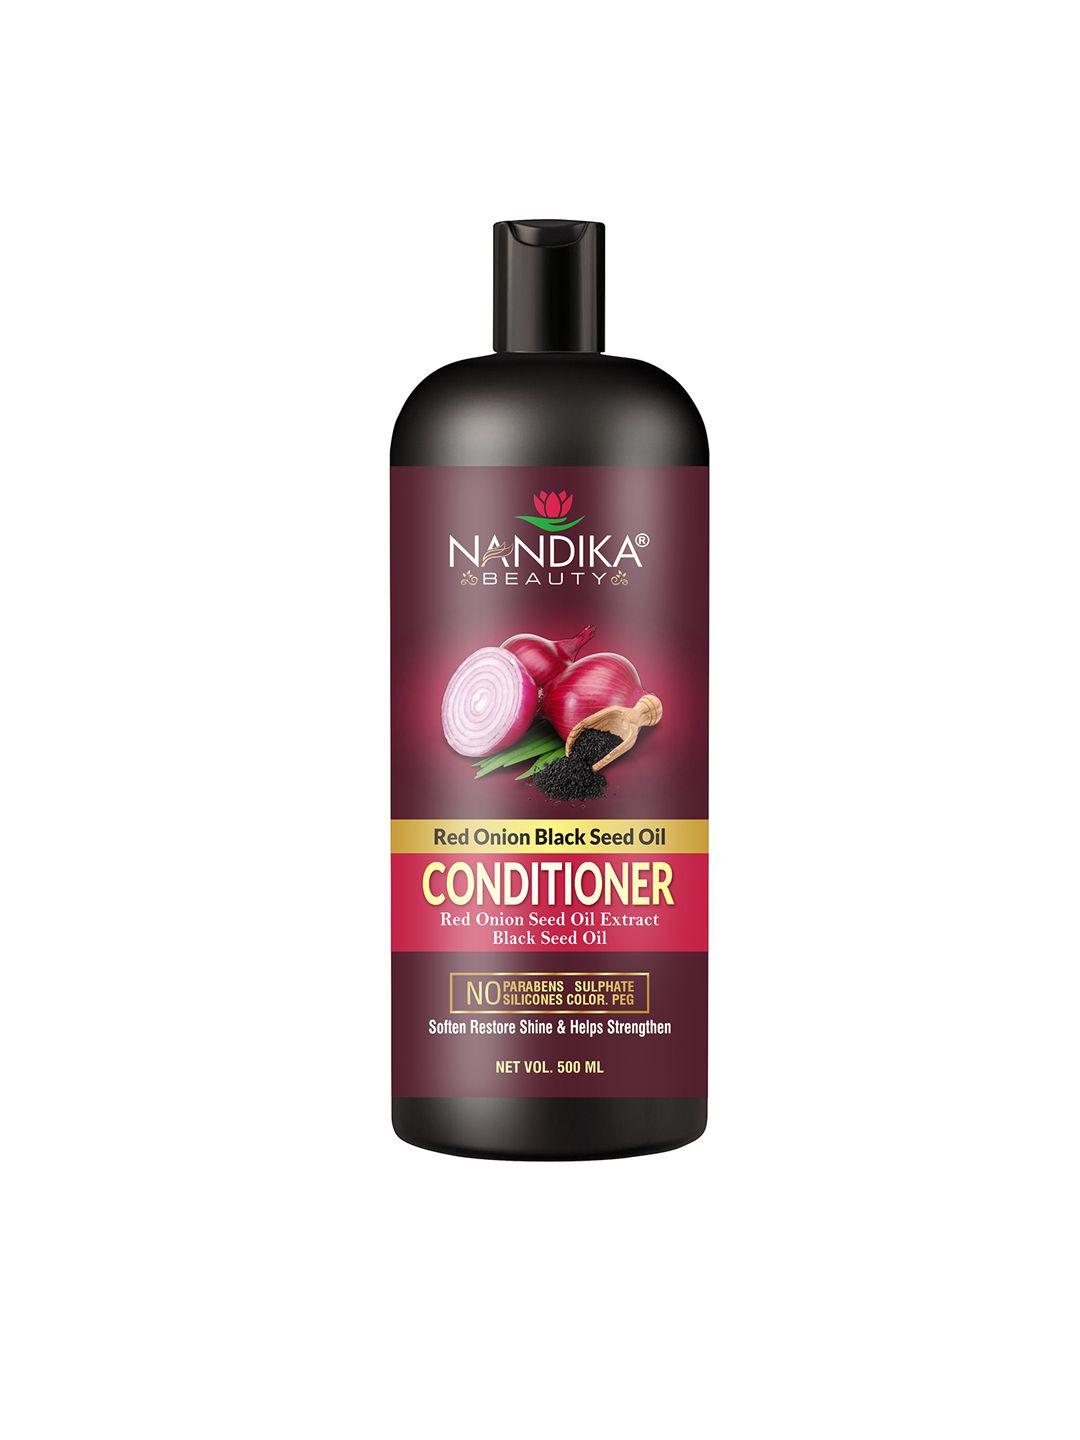 NANDIKA BEAUTY Red Onion Black Seed Oil Conditioner 500 ml